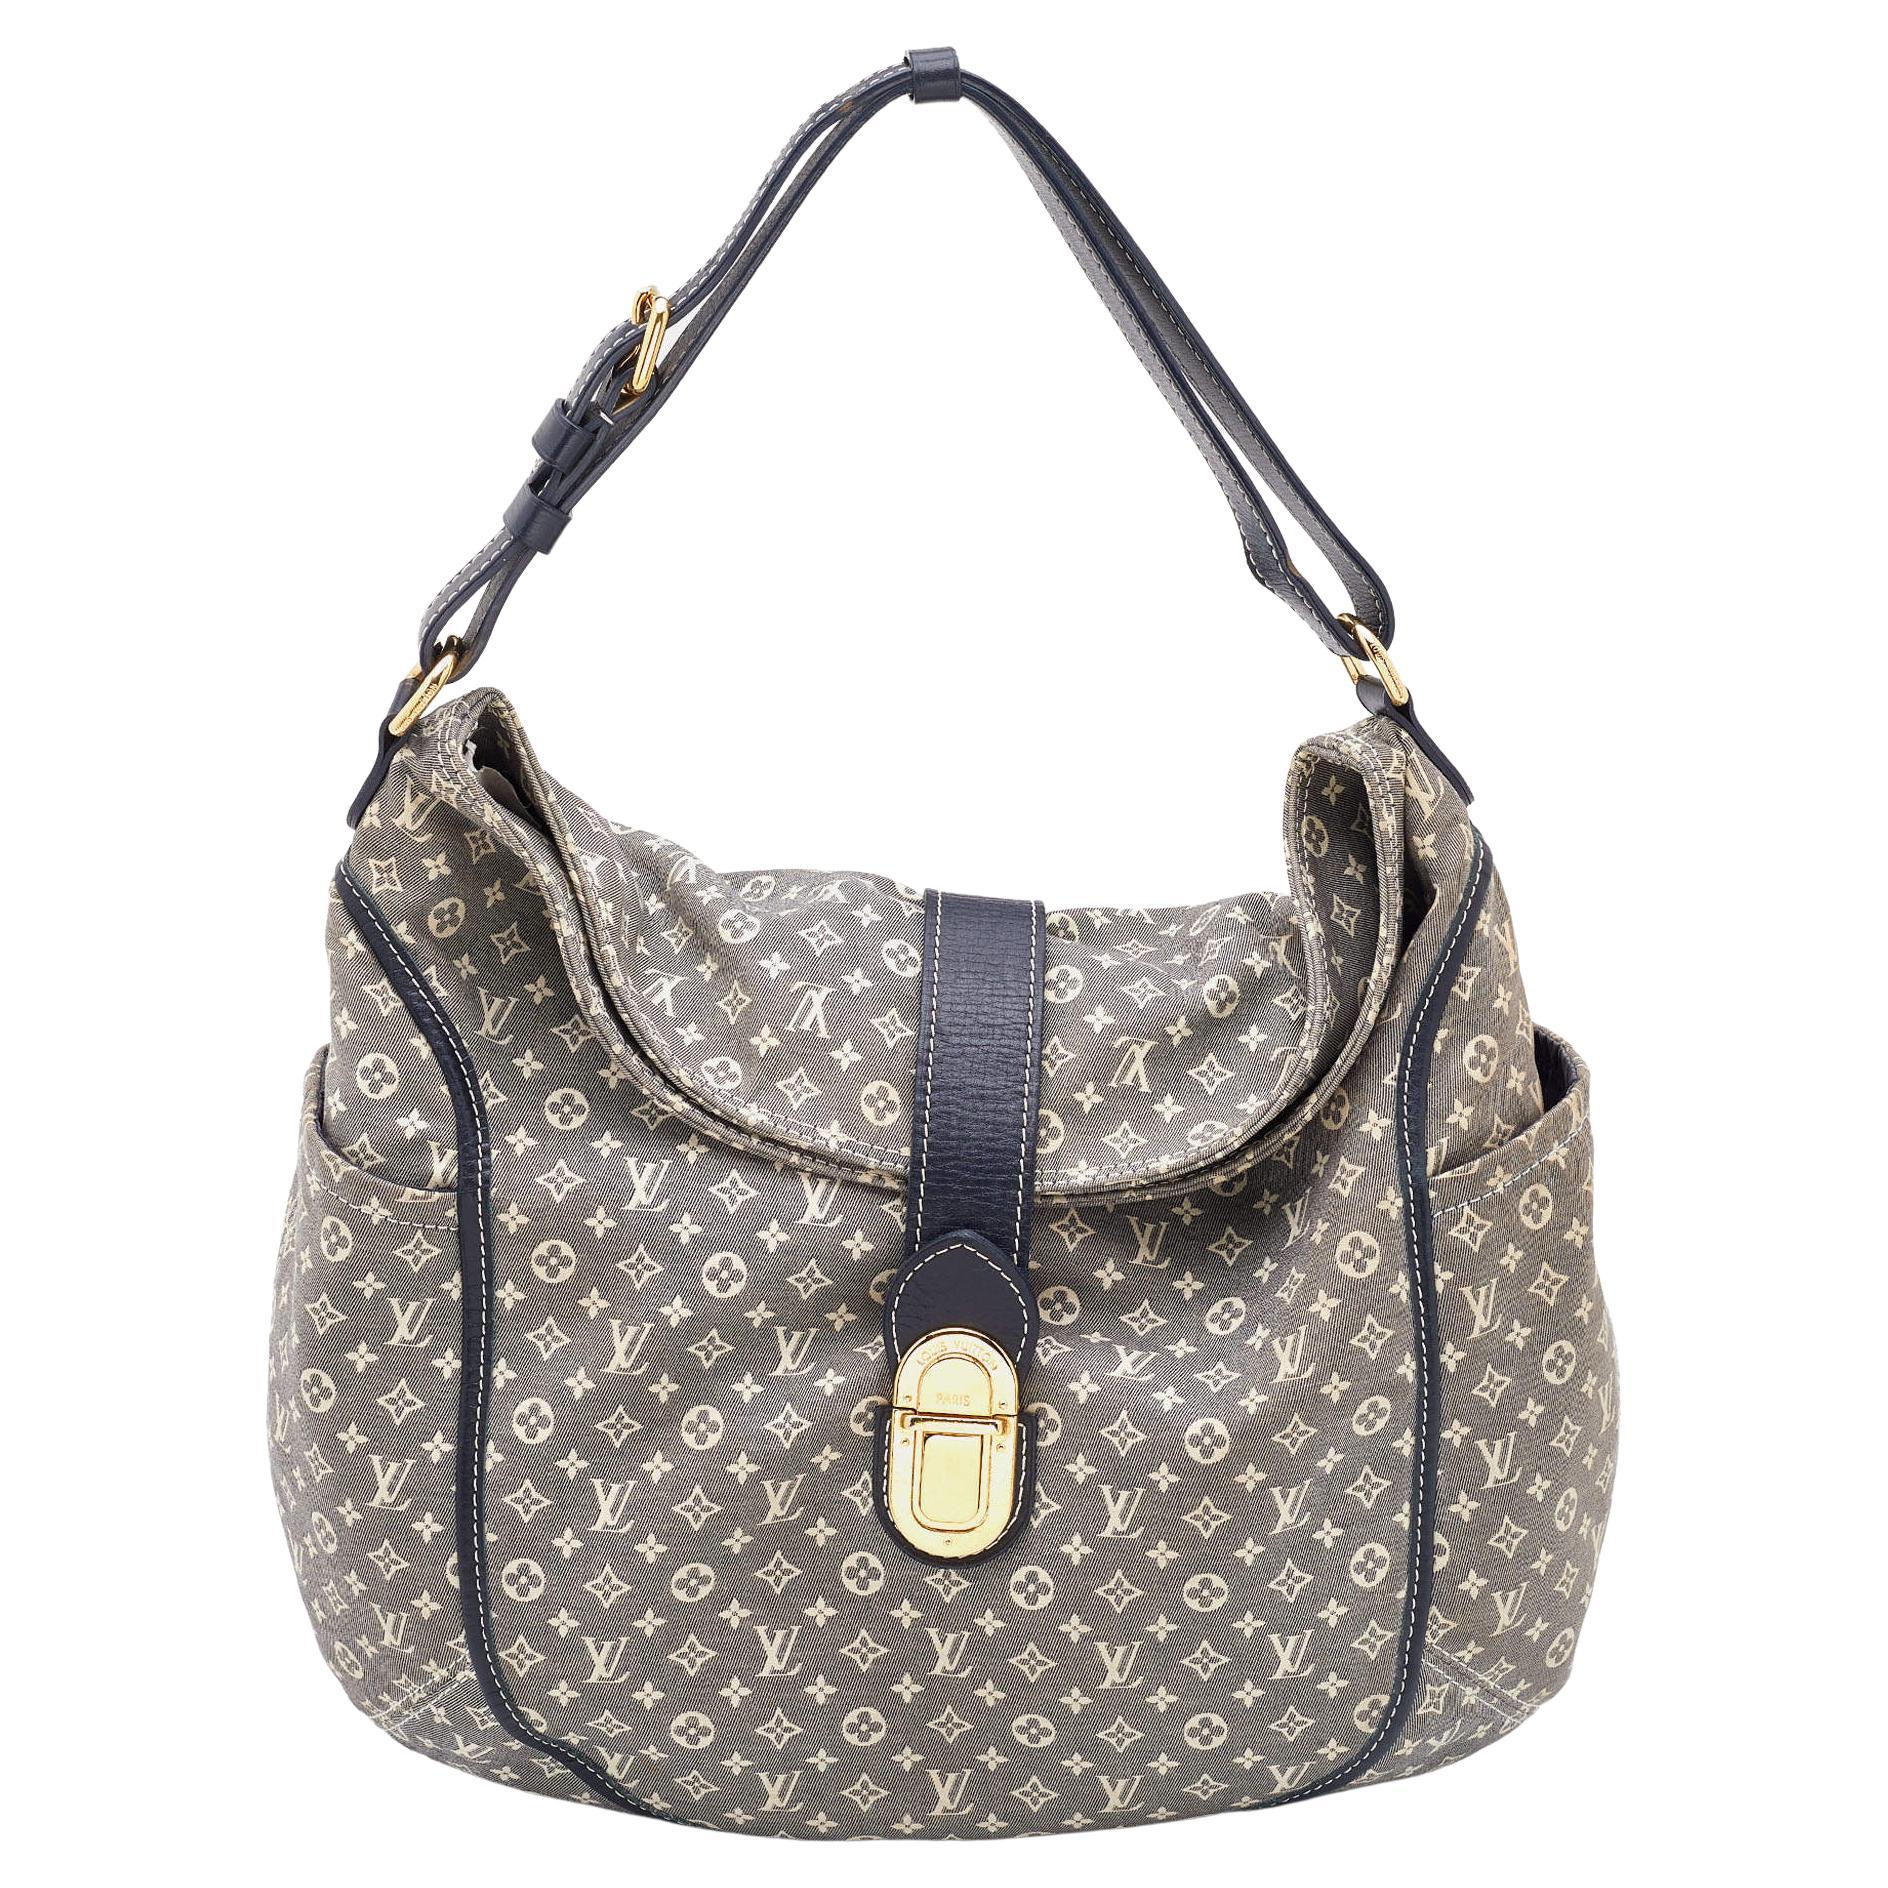 Buy Louis Vuitton Idylle Romance in Very Good Condition Online in